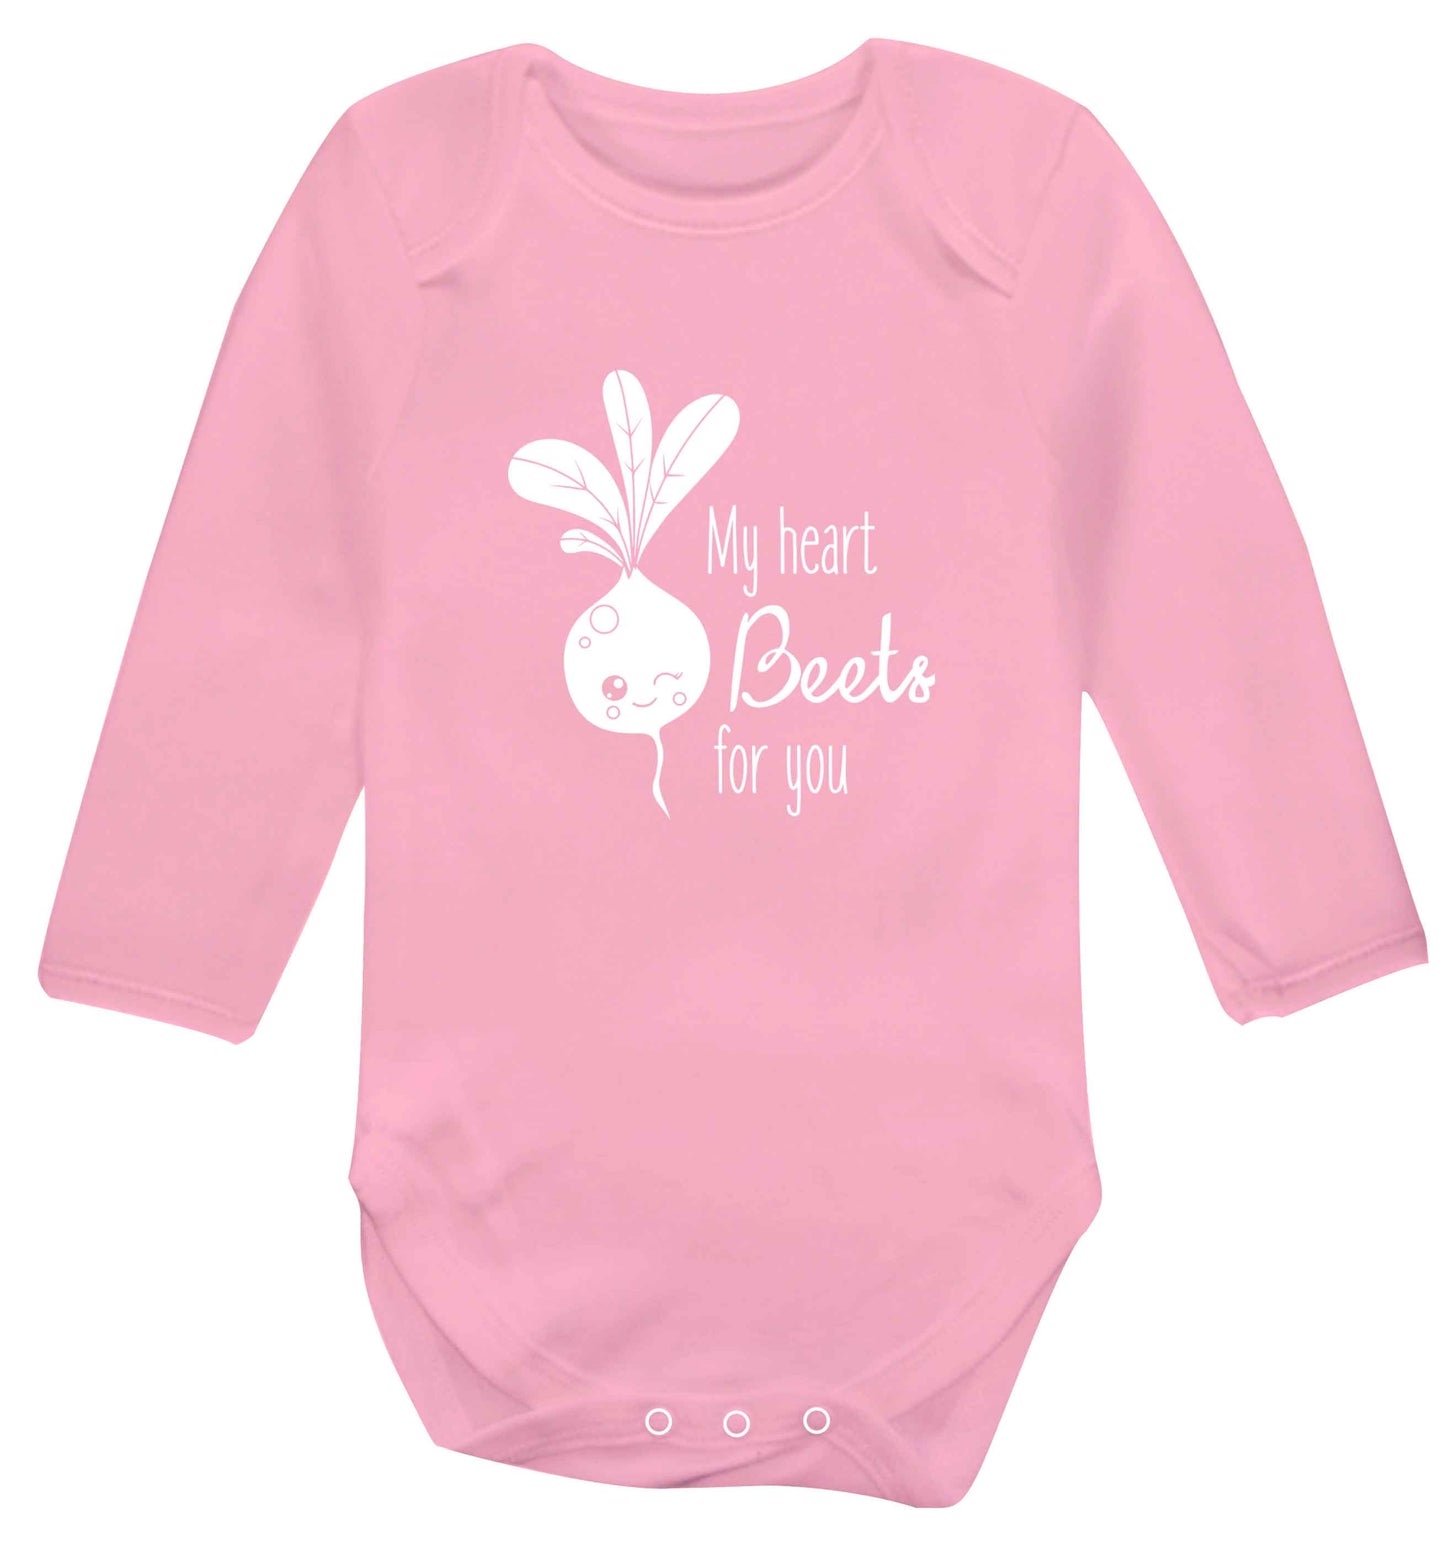 My heart beets for you baby vest long sleeved pale pink 6-12 months